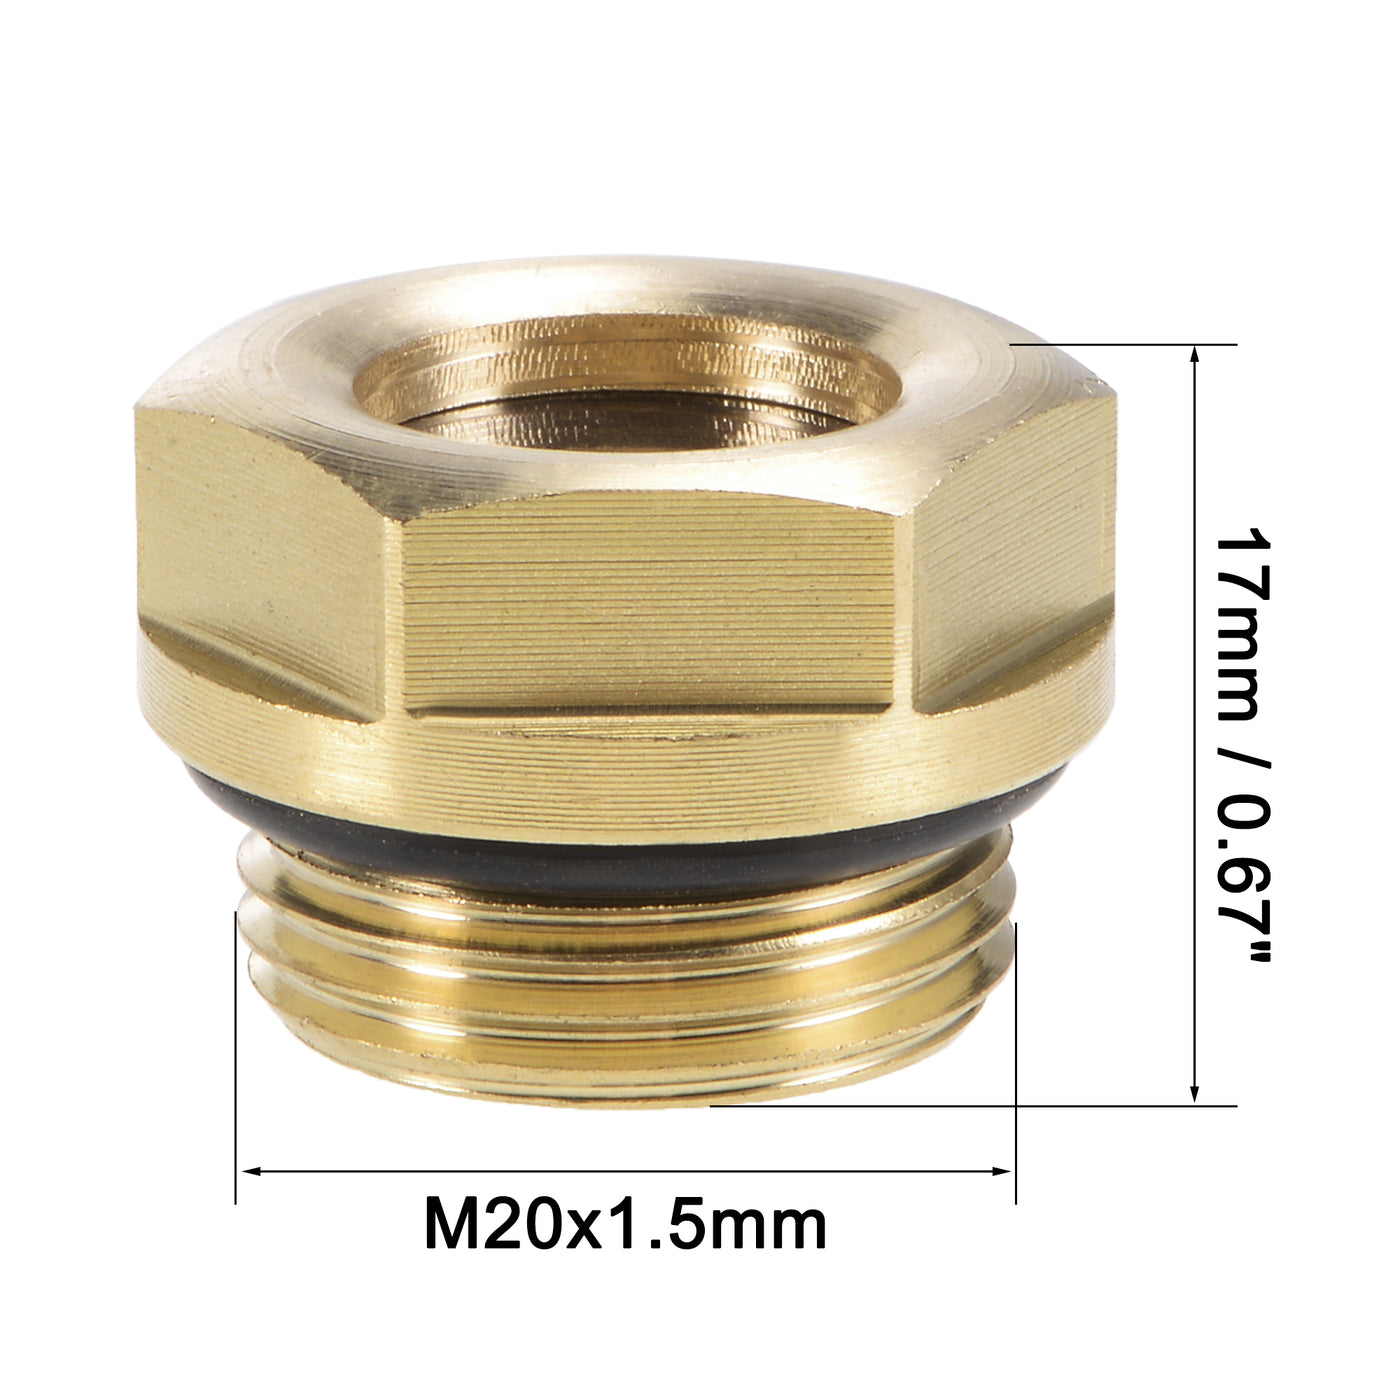 Uxcell Uxcell Oil Liquid Level Gauge Sight Glass M22x1.5mm Male Threaded Brass Air Compressor Fittings with O-Ring, Yellow 2Pcs